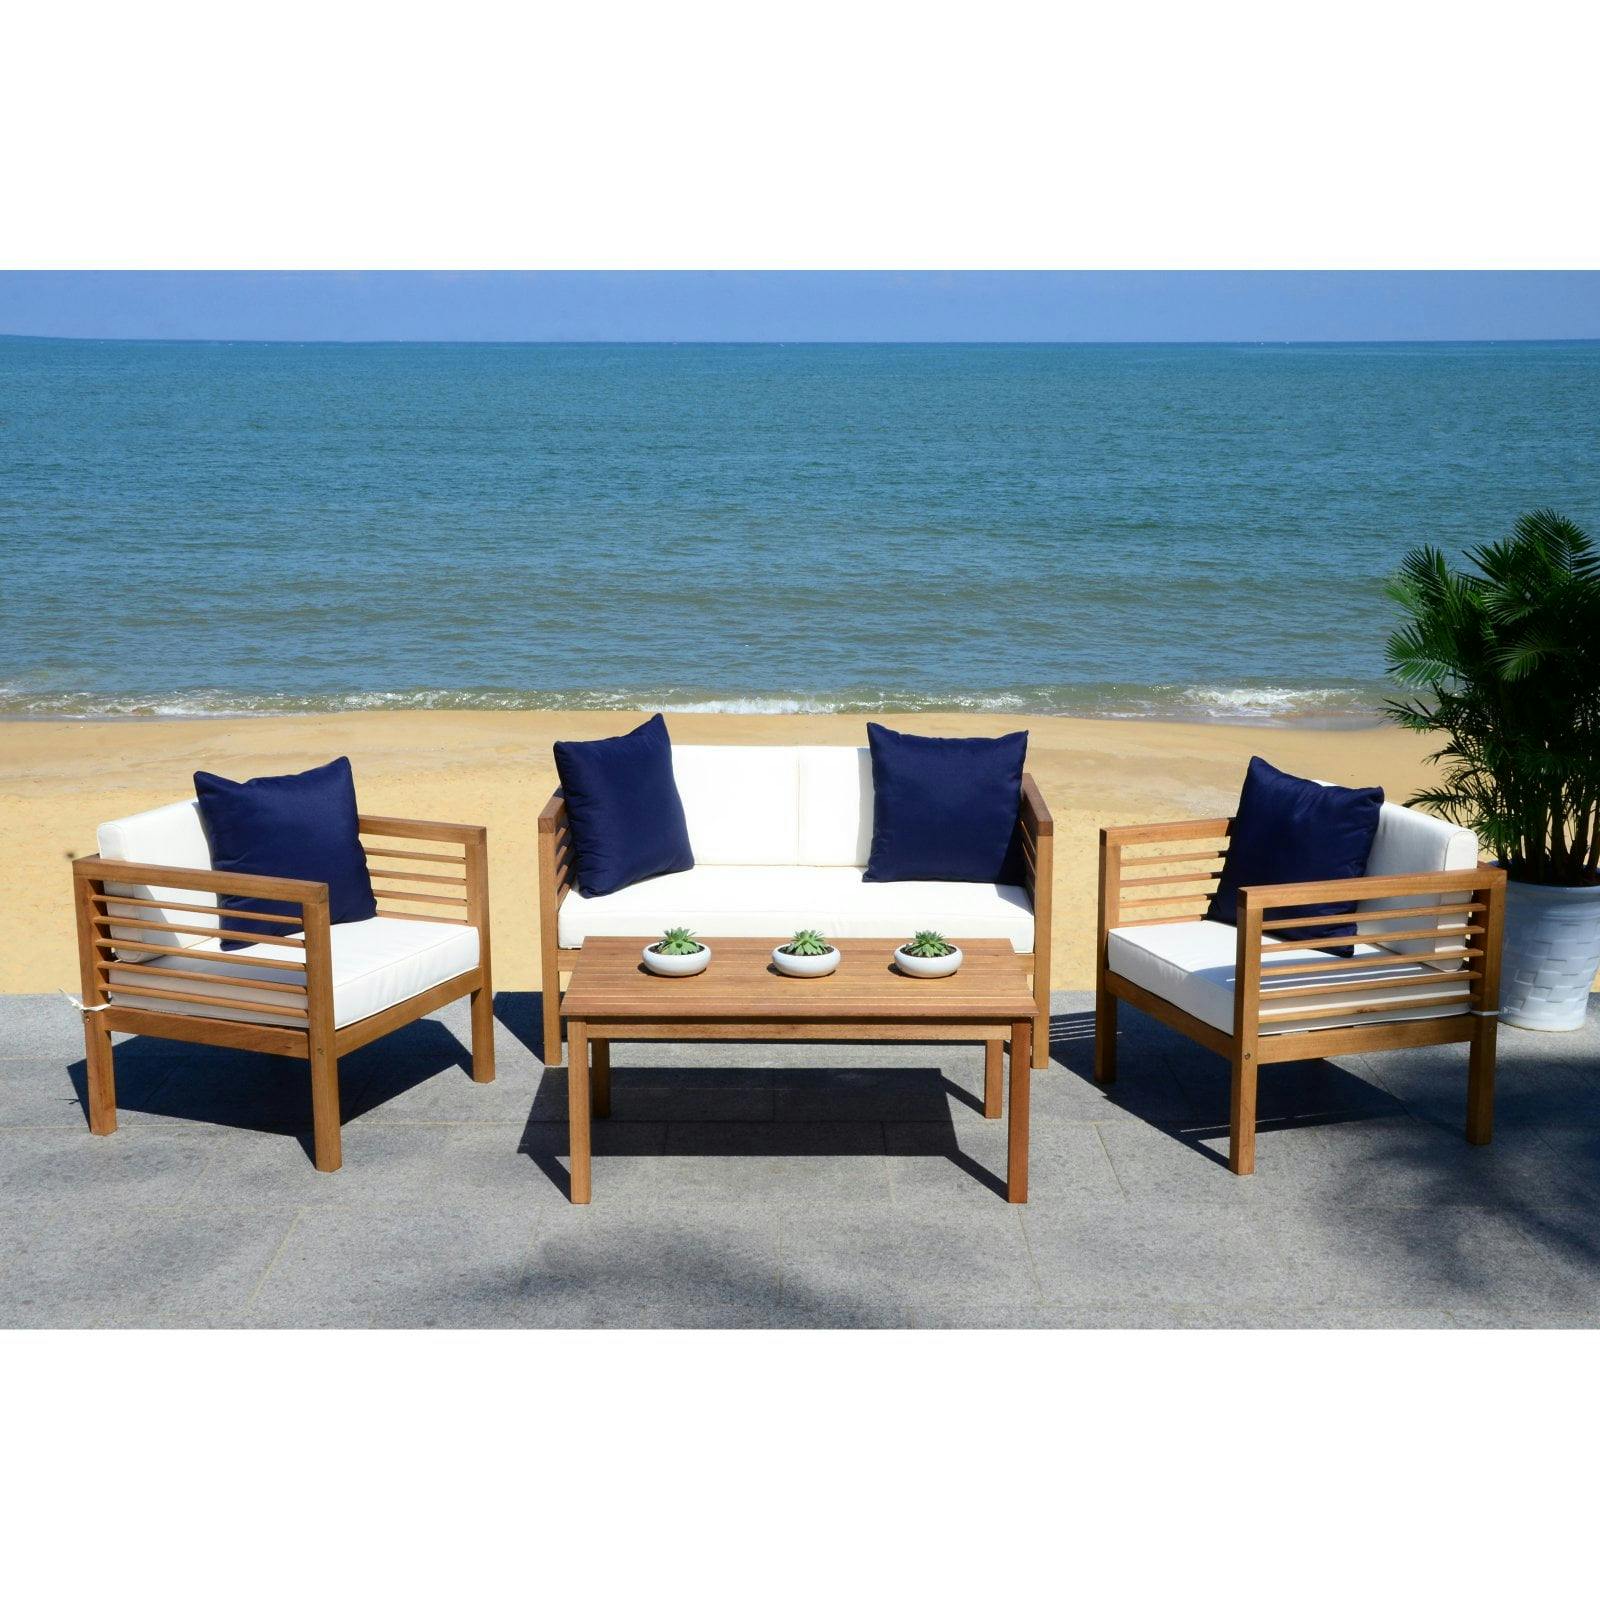 Barcelona Coastal Chic 4-Person Black & White Outdoor Seating Set